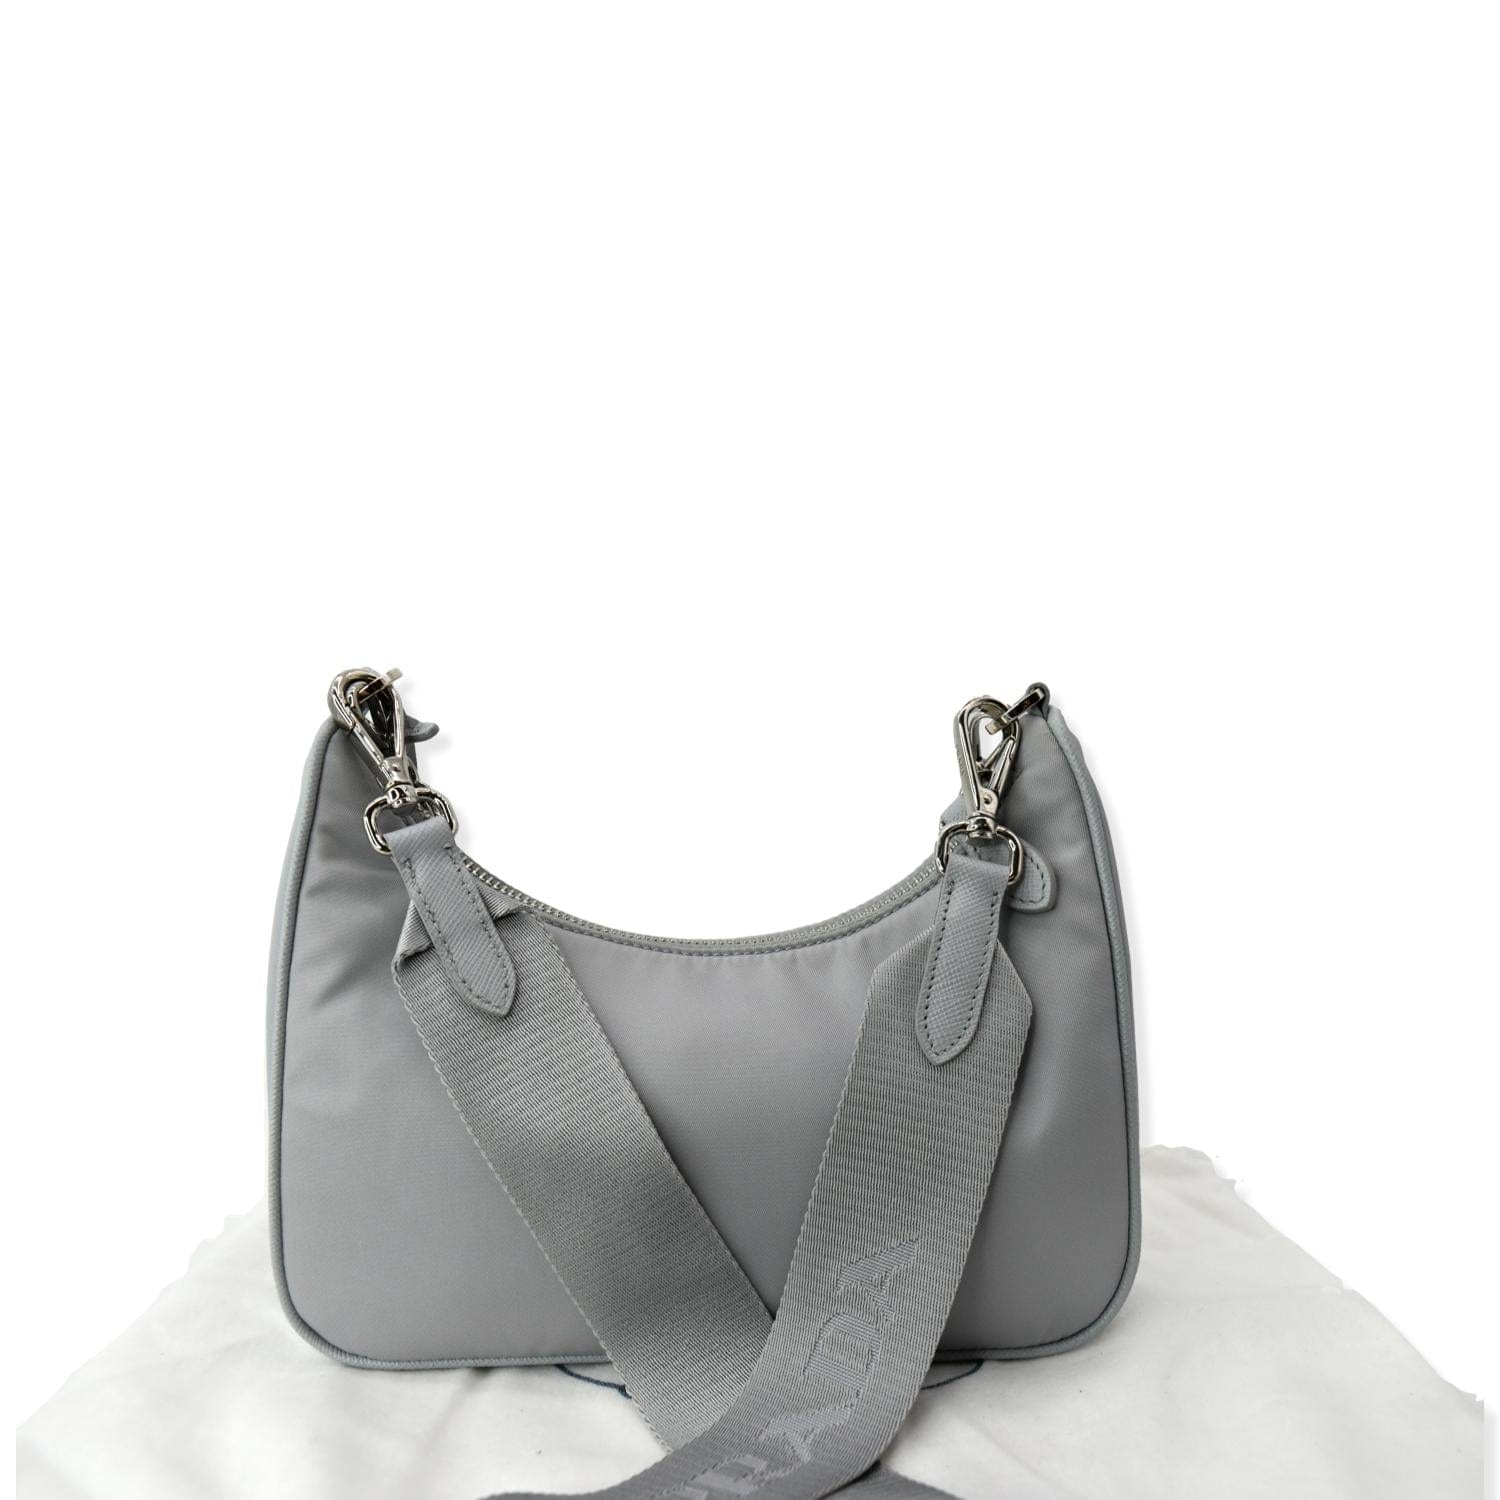 Prada Re-edition 2005 Textured Leather And Nylon Shoulder Bag at